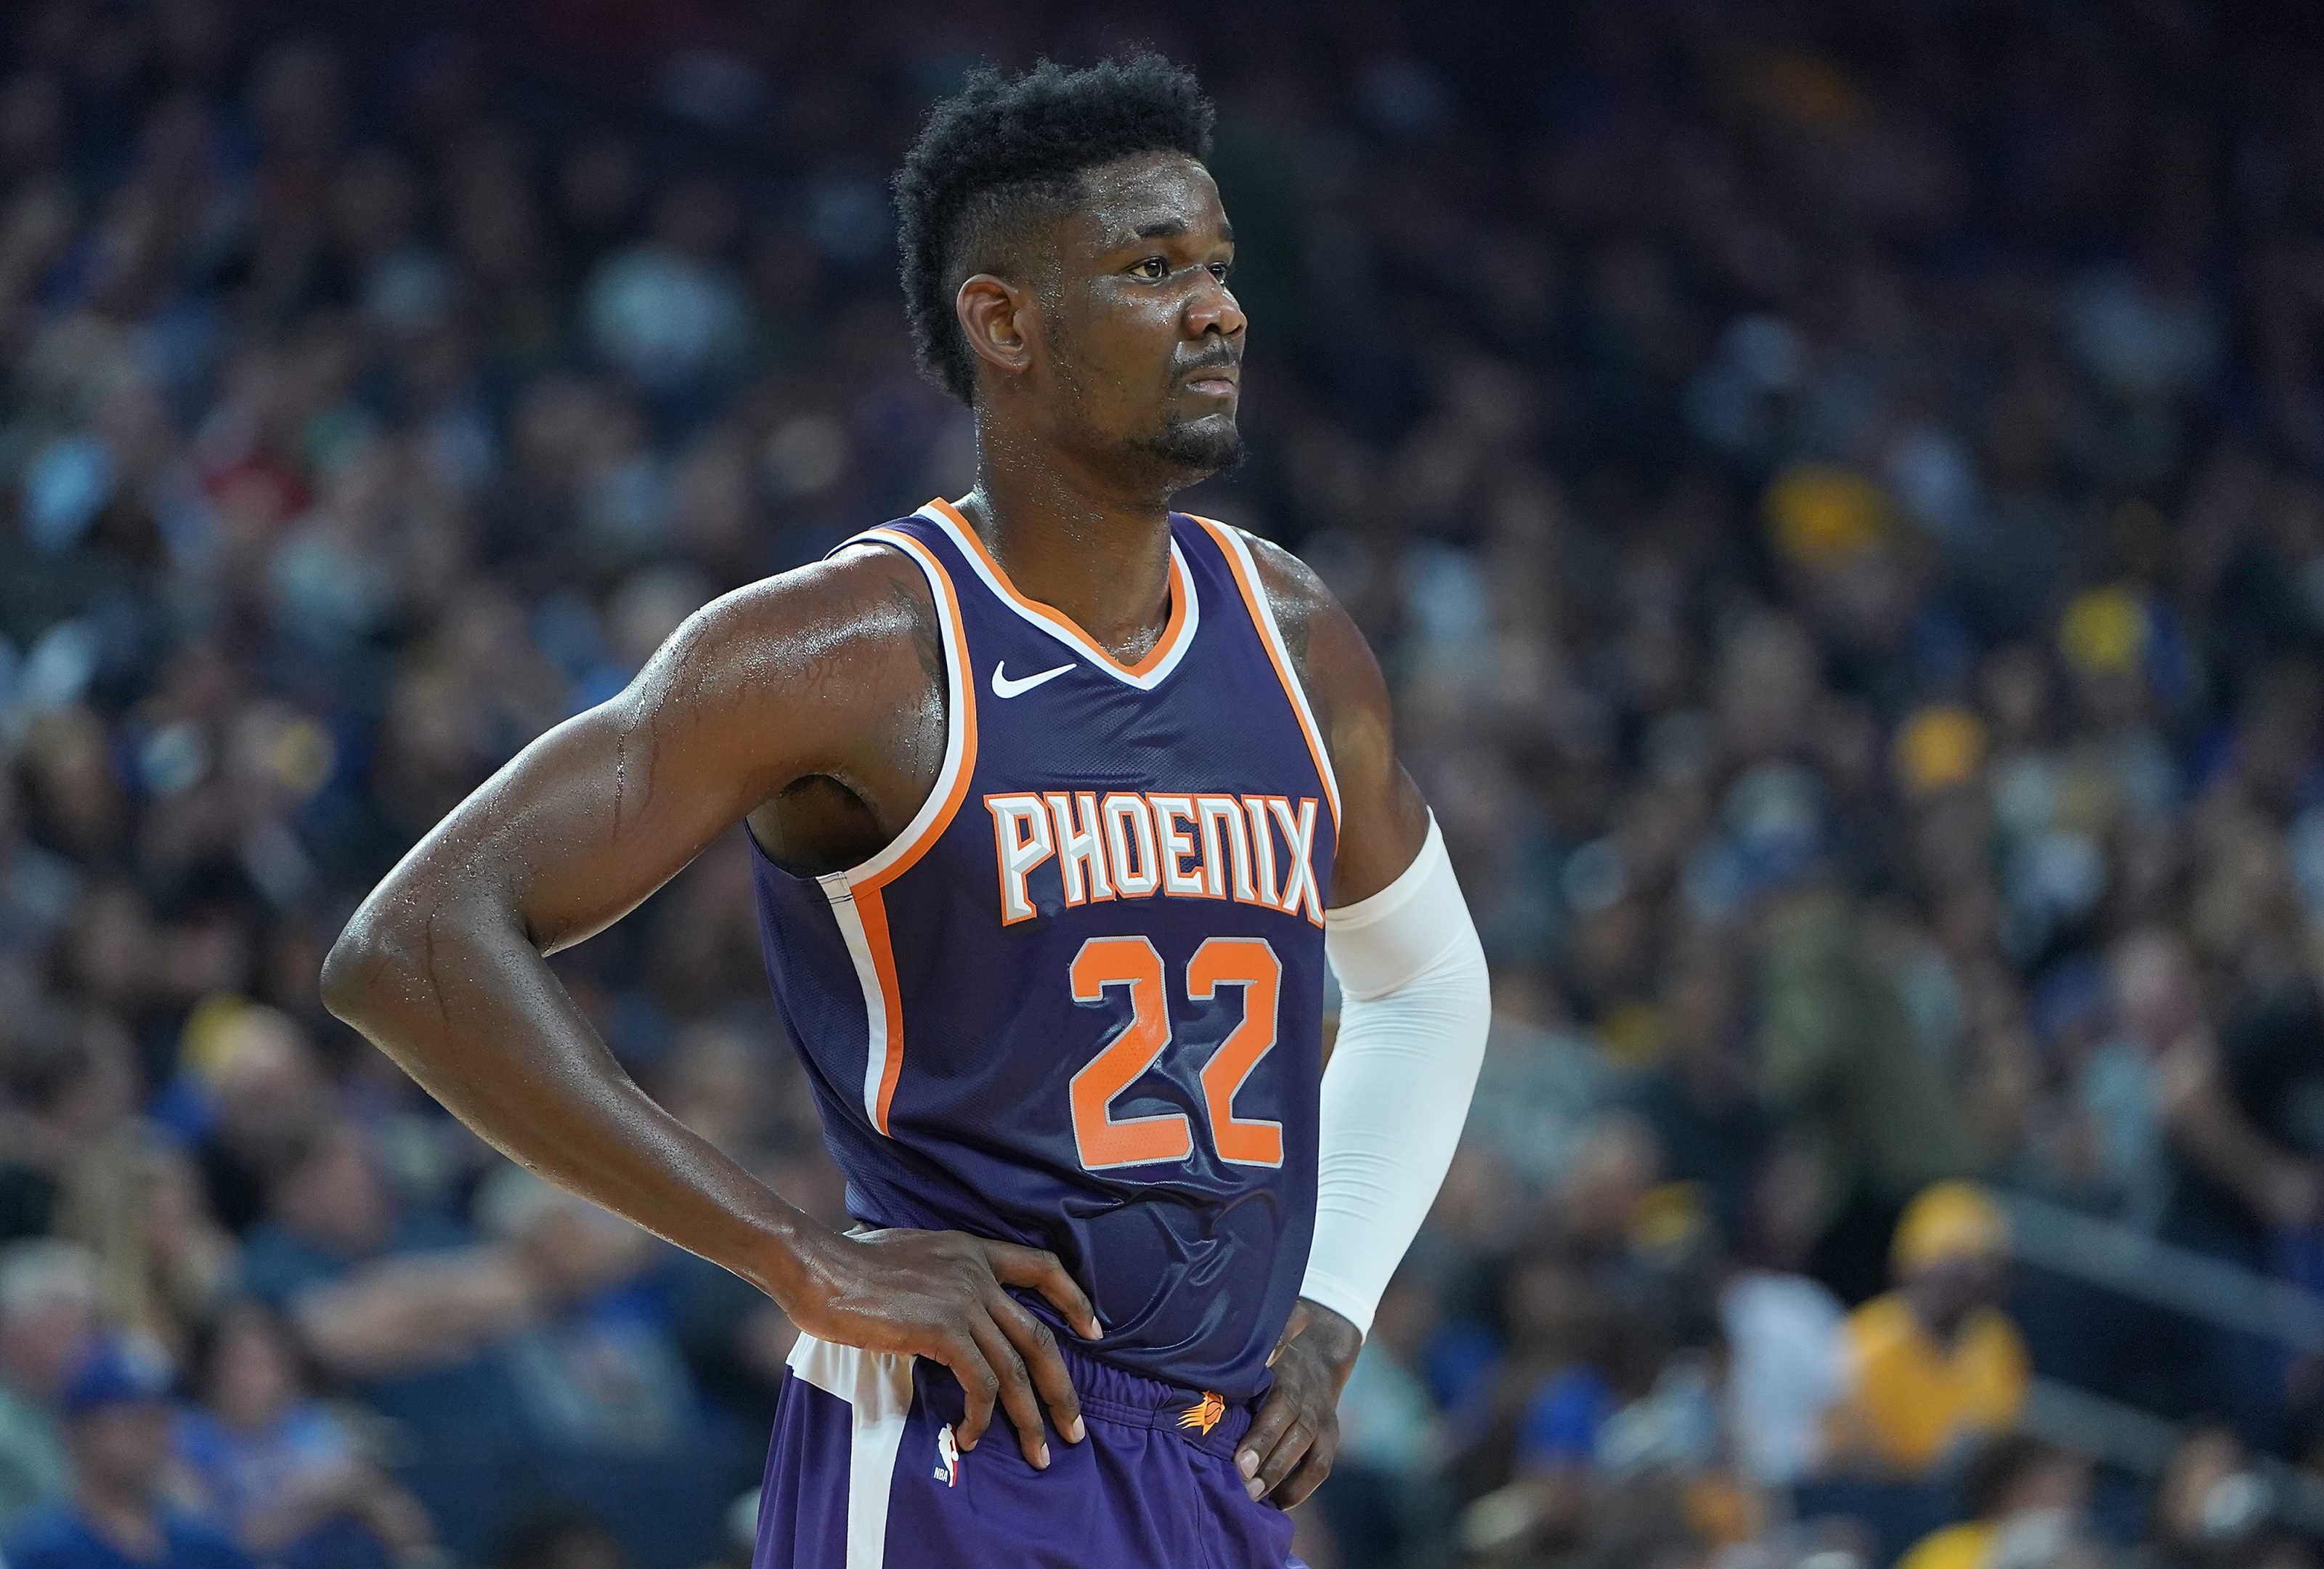 Ranking NBA's best young players: Devin Booker, Deandre Ayton on list